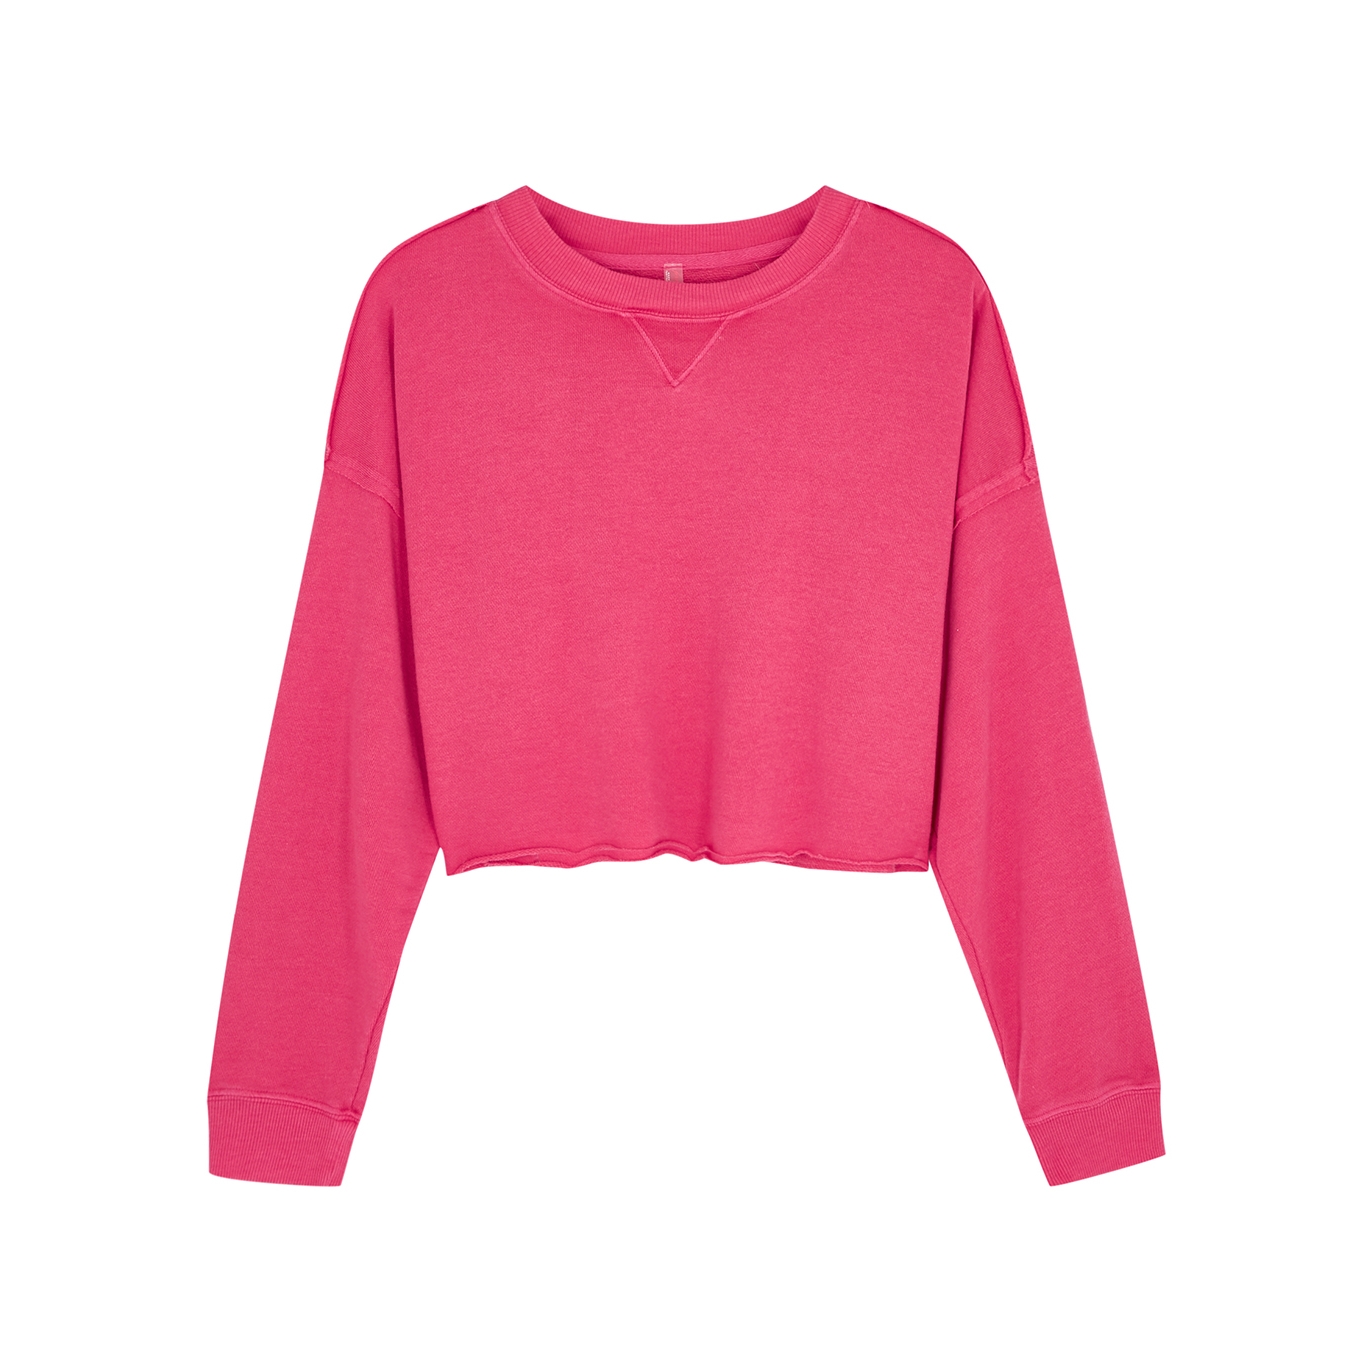 Free People Movement Cut It Out Pink Cropped Cotton-blend Sweatshirt